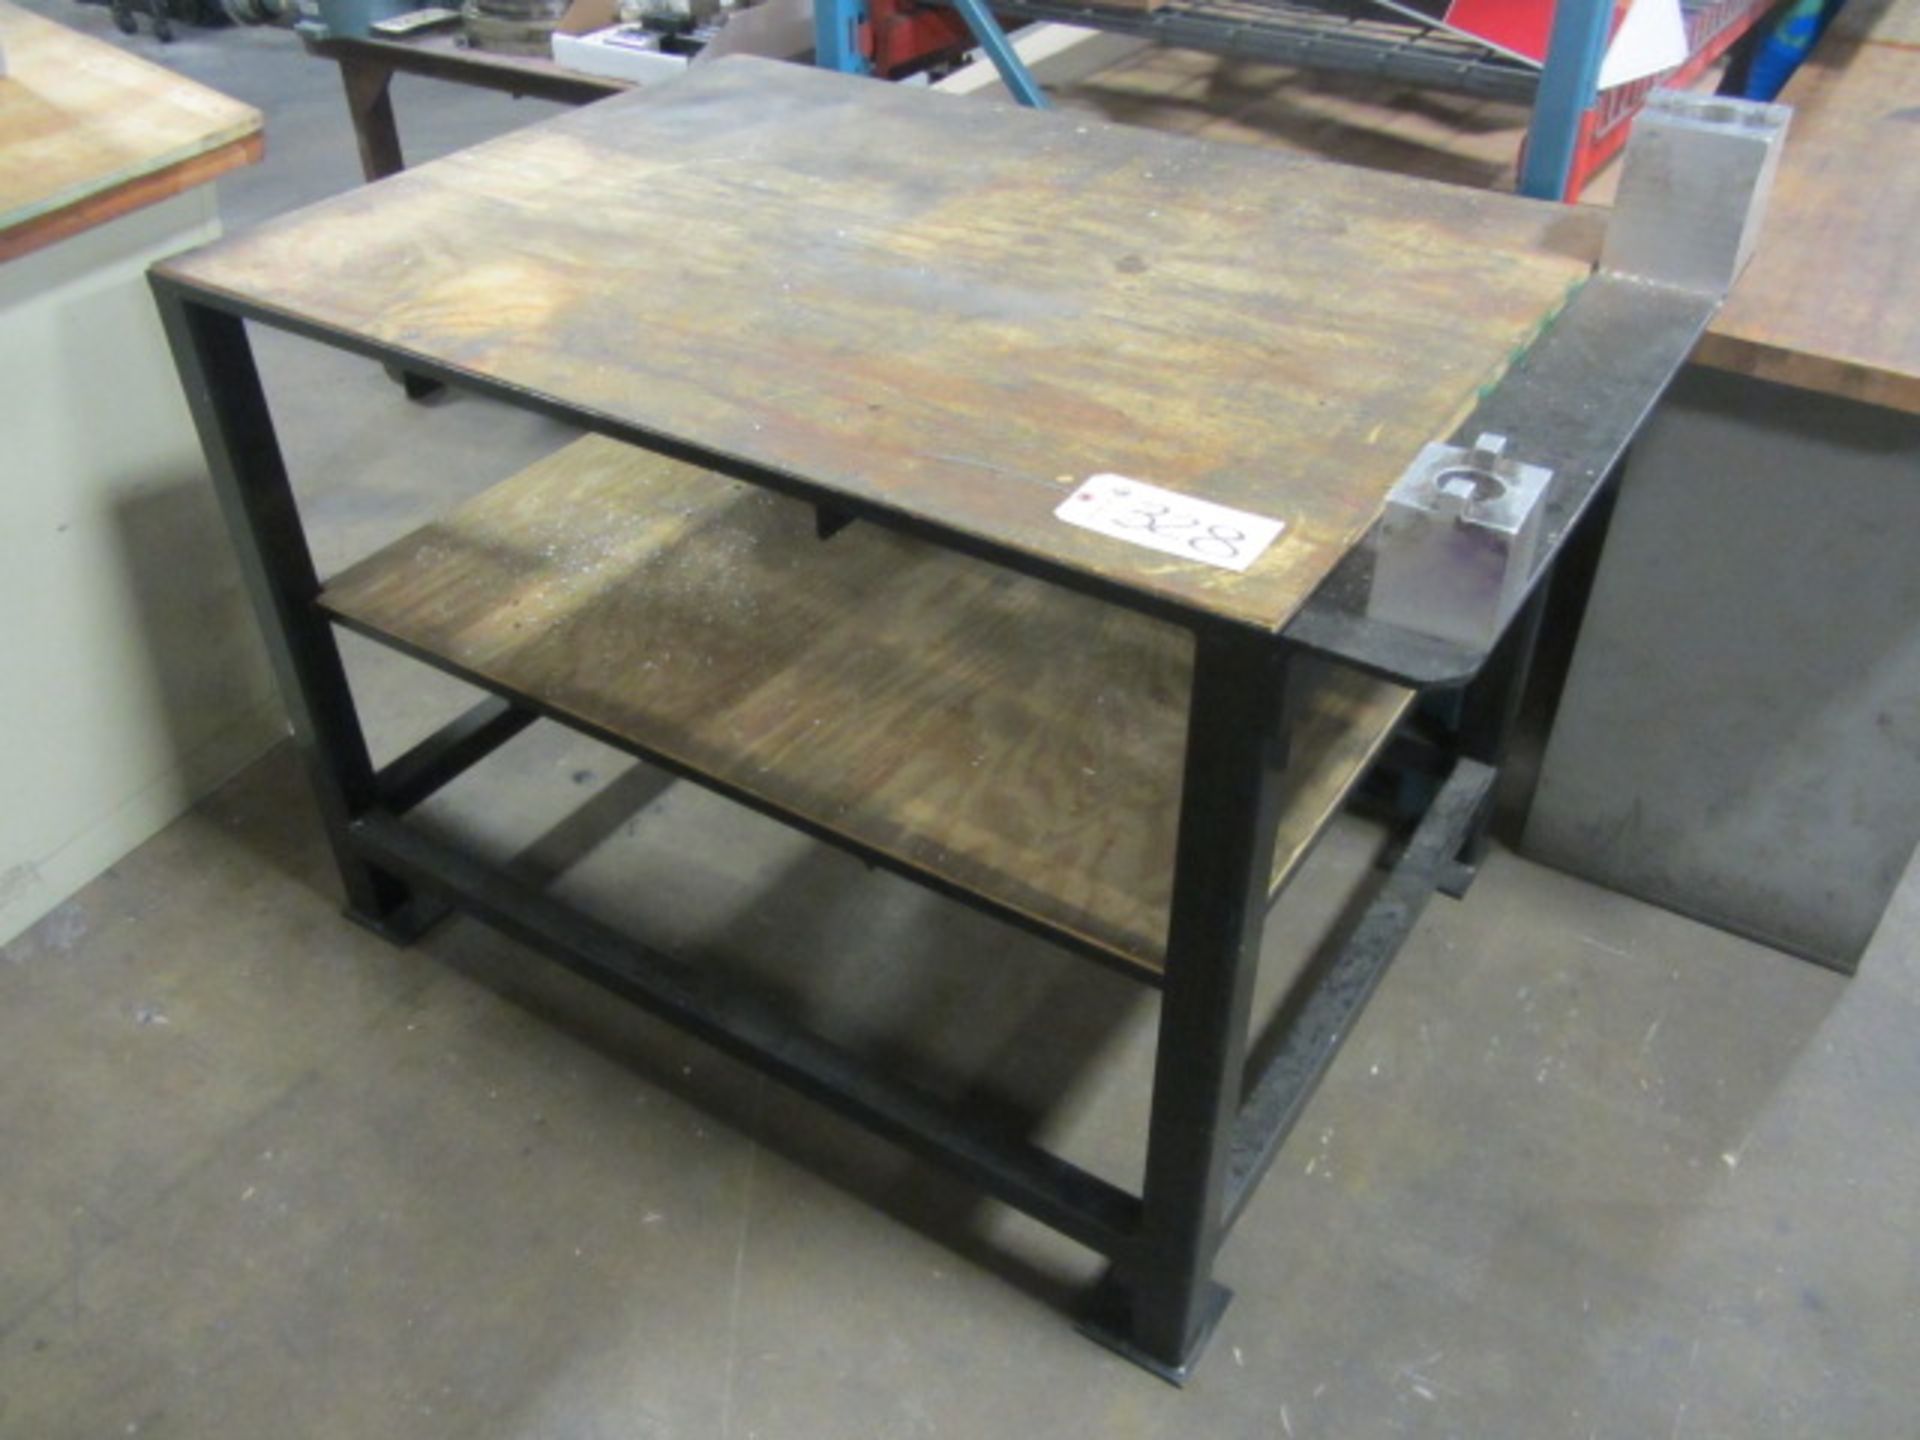 38" x 55" Steel Set-Up Table with 40/50 Taper Attachments